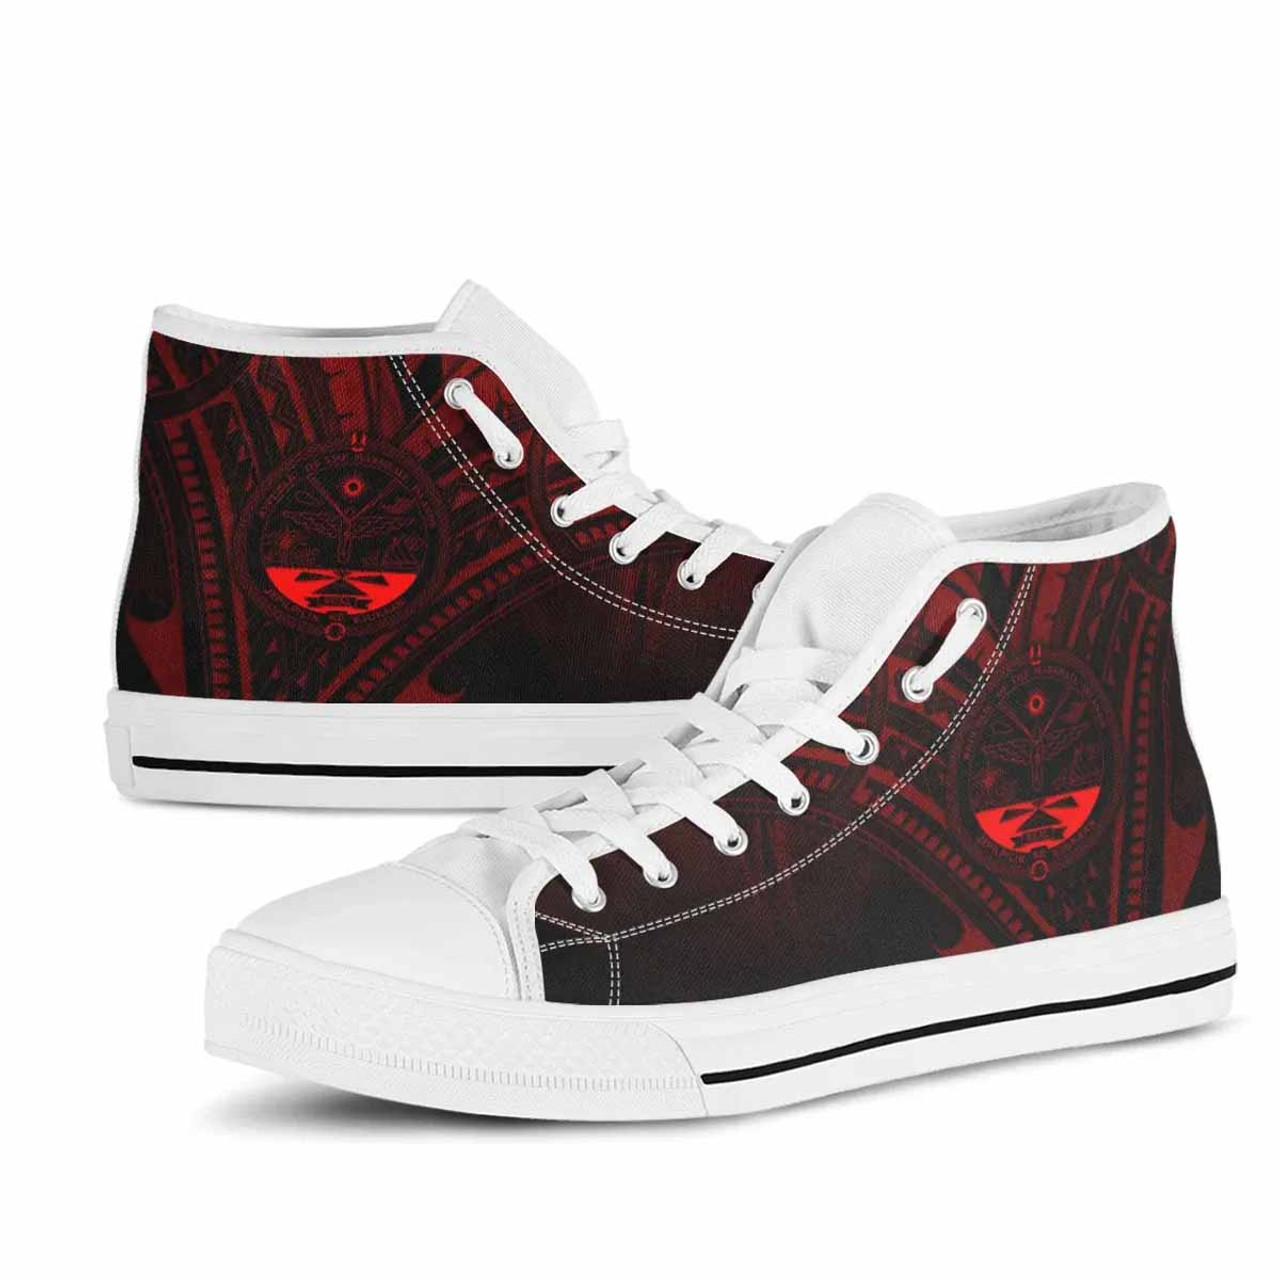 Marshall Islands High Top Shoes - Cross Style Red Color 10